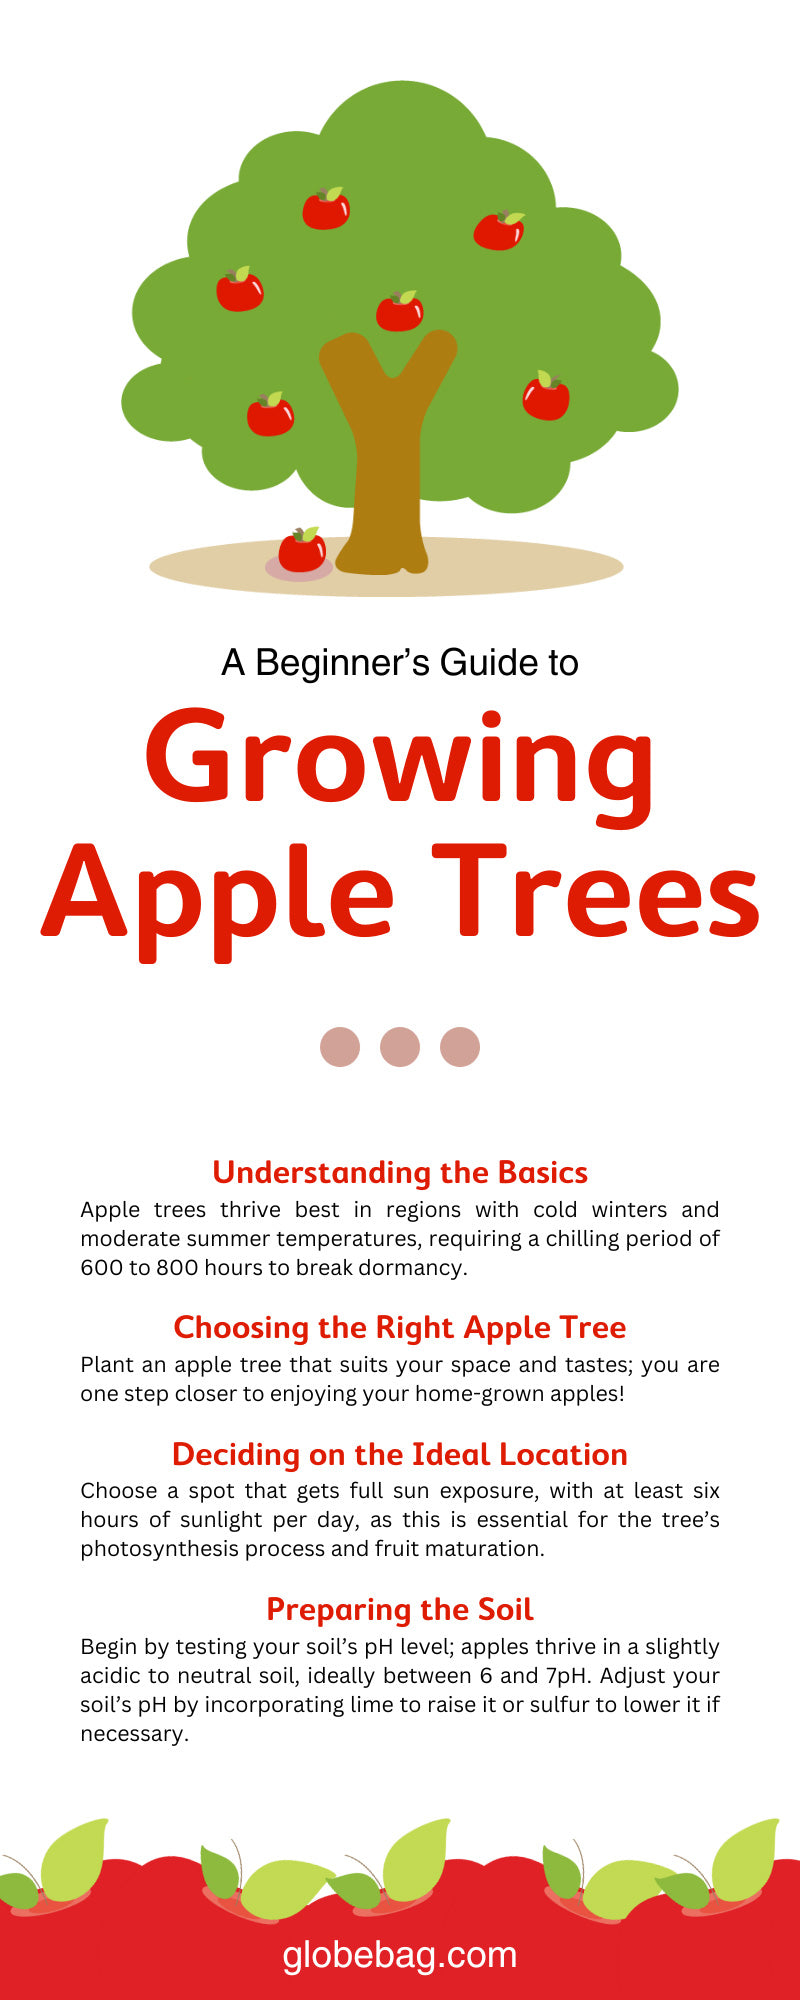 A Beginner’s Guide to Growing Apple Trees